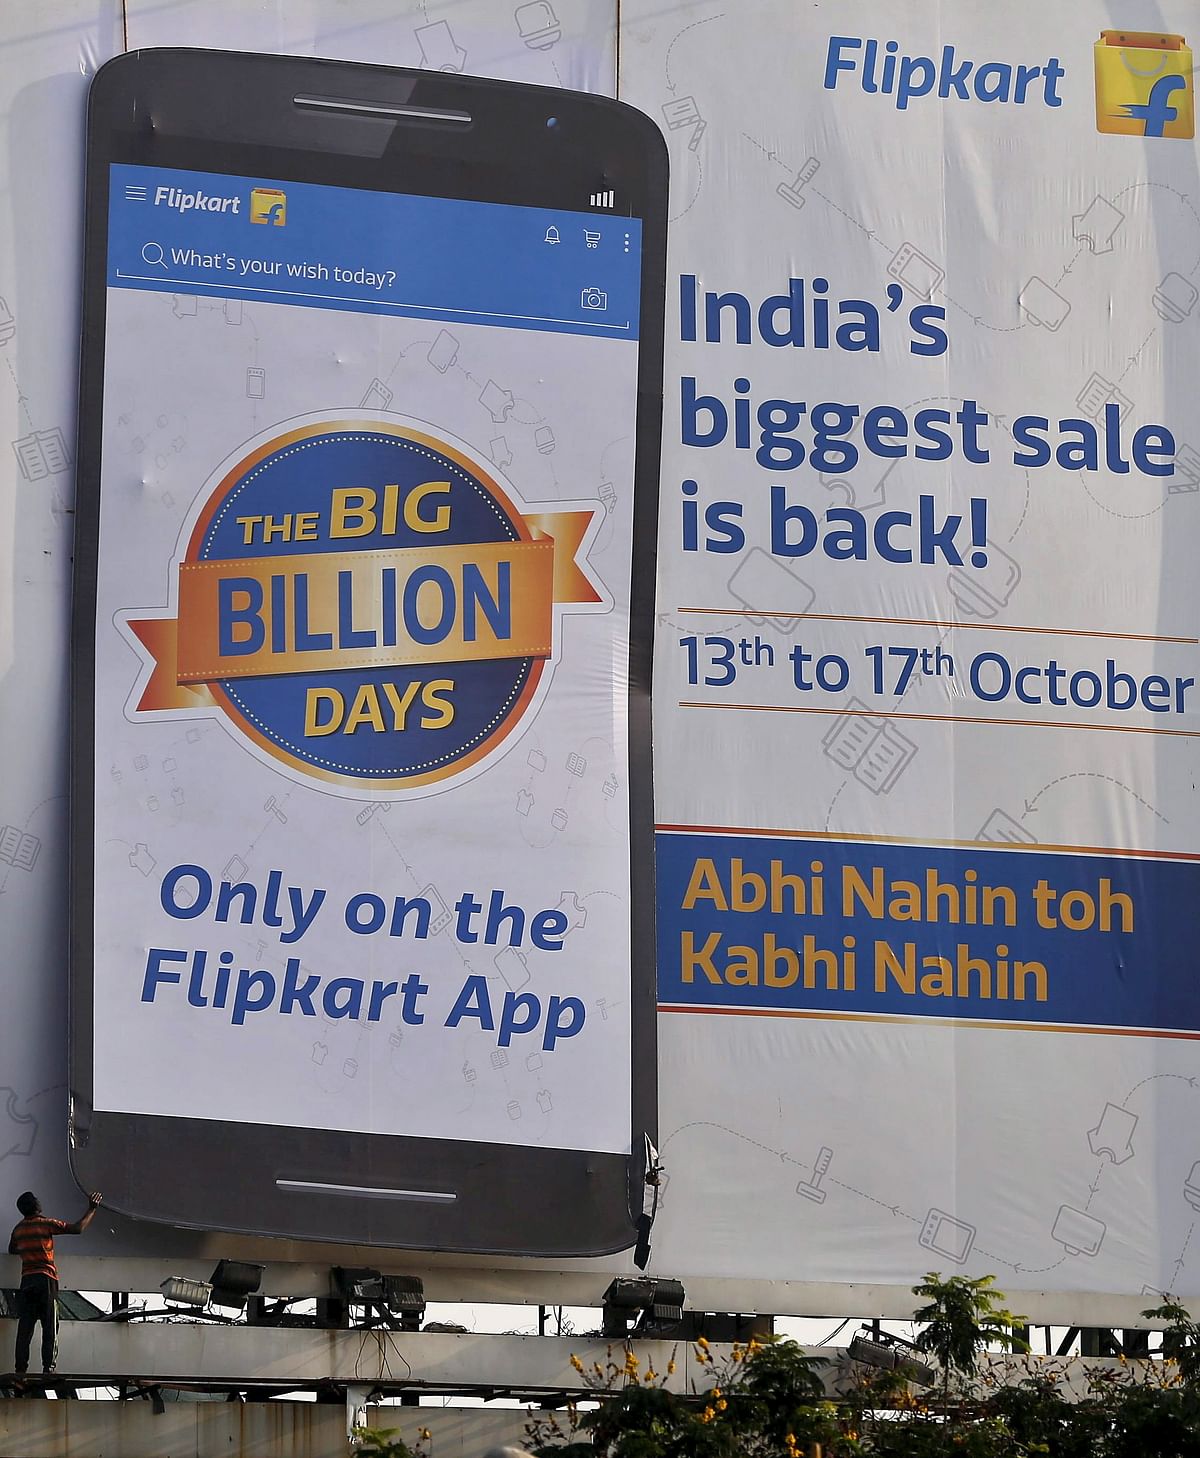 E-commerce giant Flipkart has lost 27% of its valuation. is this the beginning of the end for India’s startups?